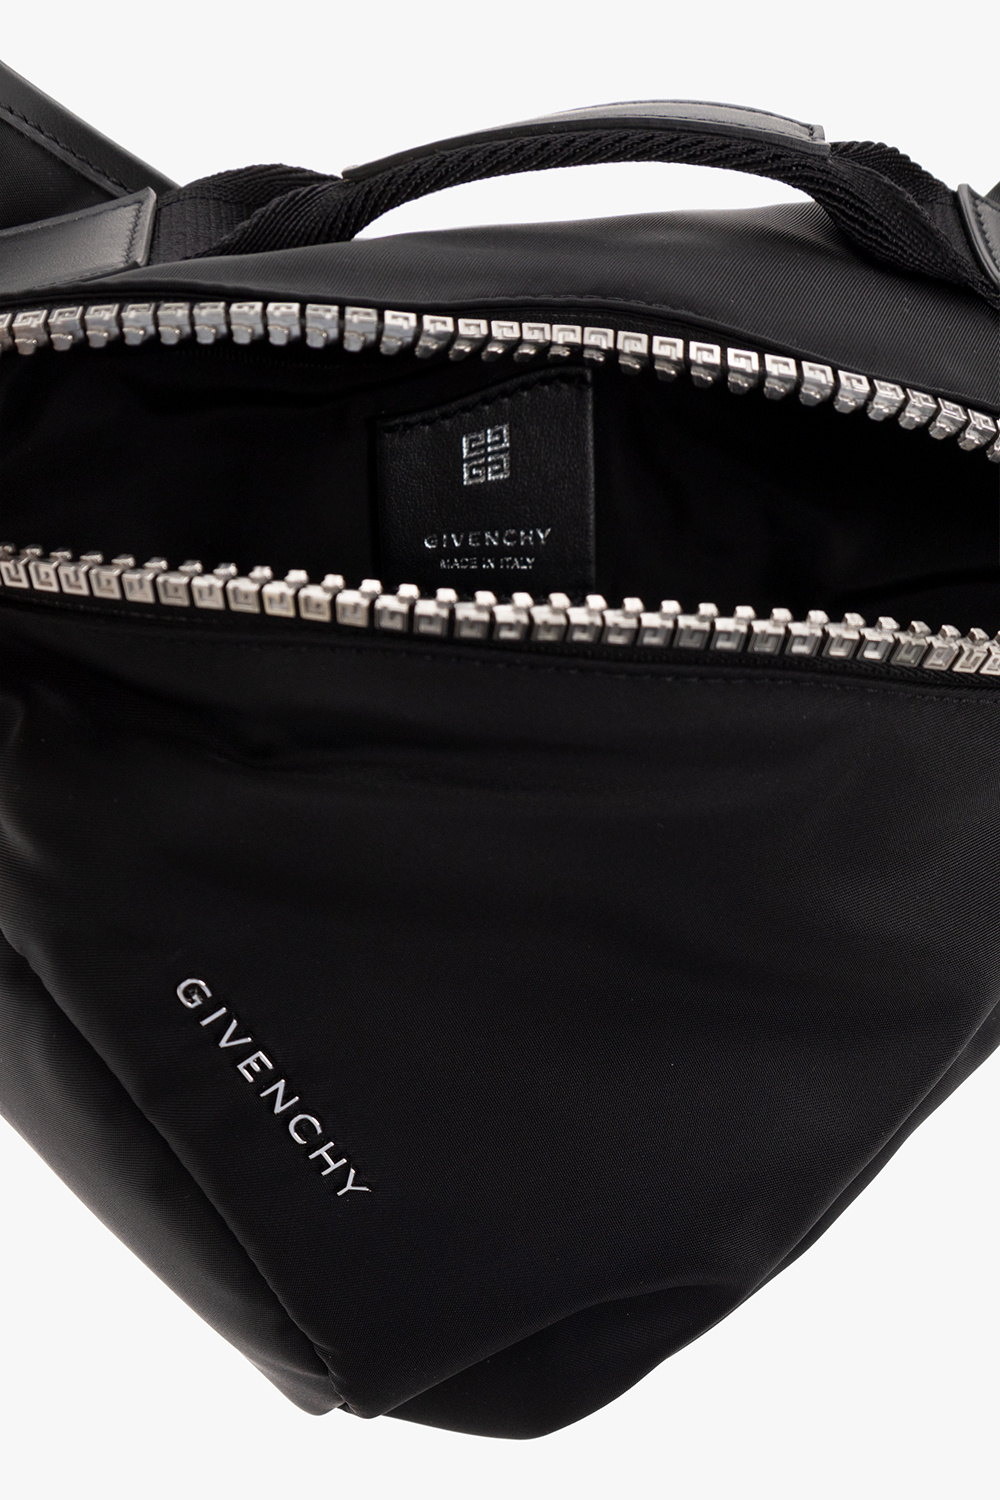 Givenchy ‘Triangle Small’ shoulder bag